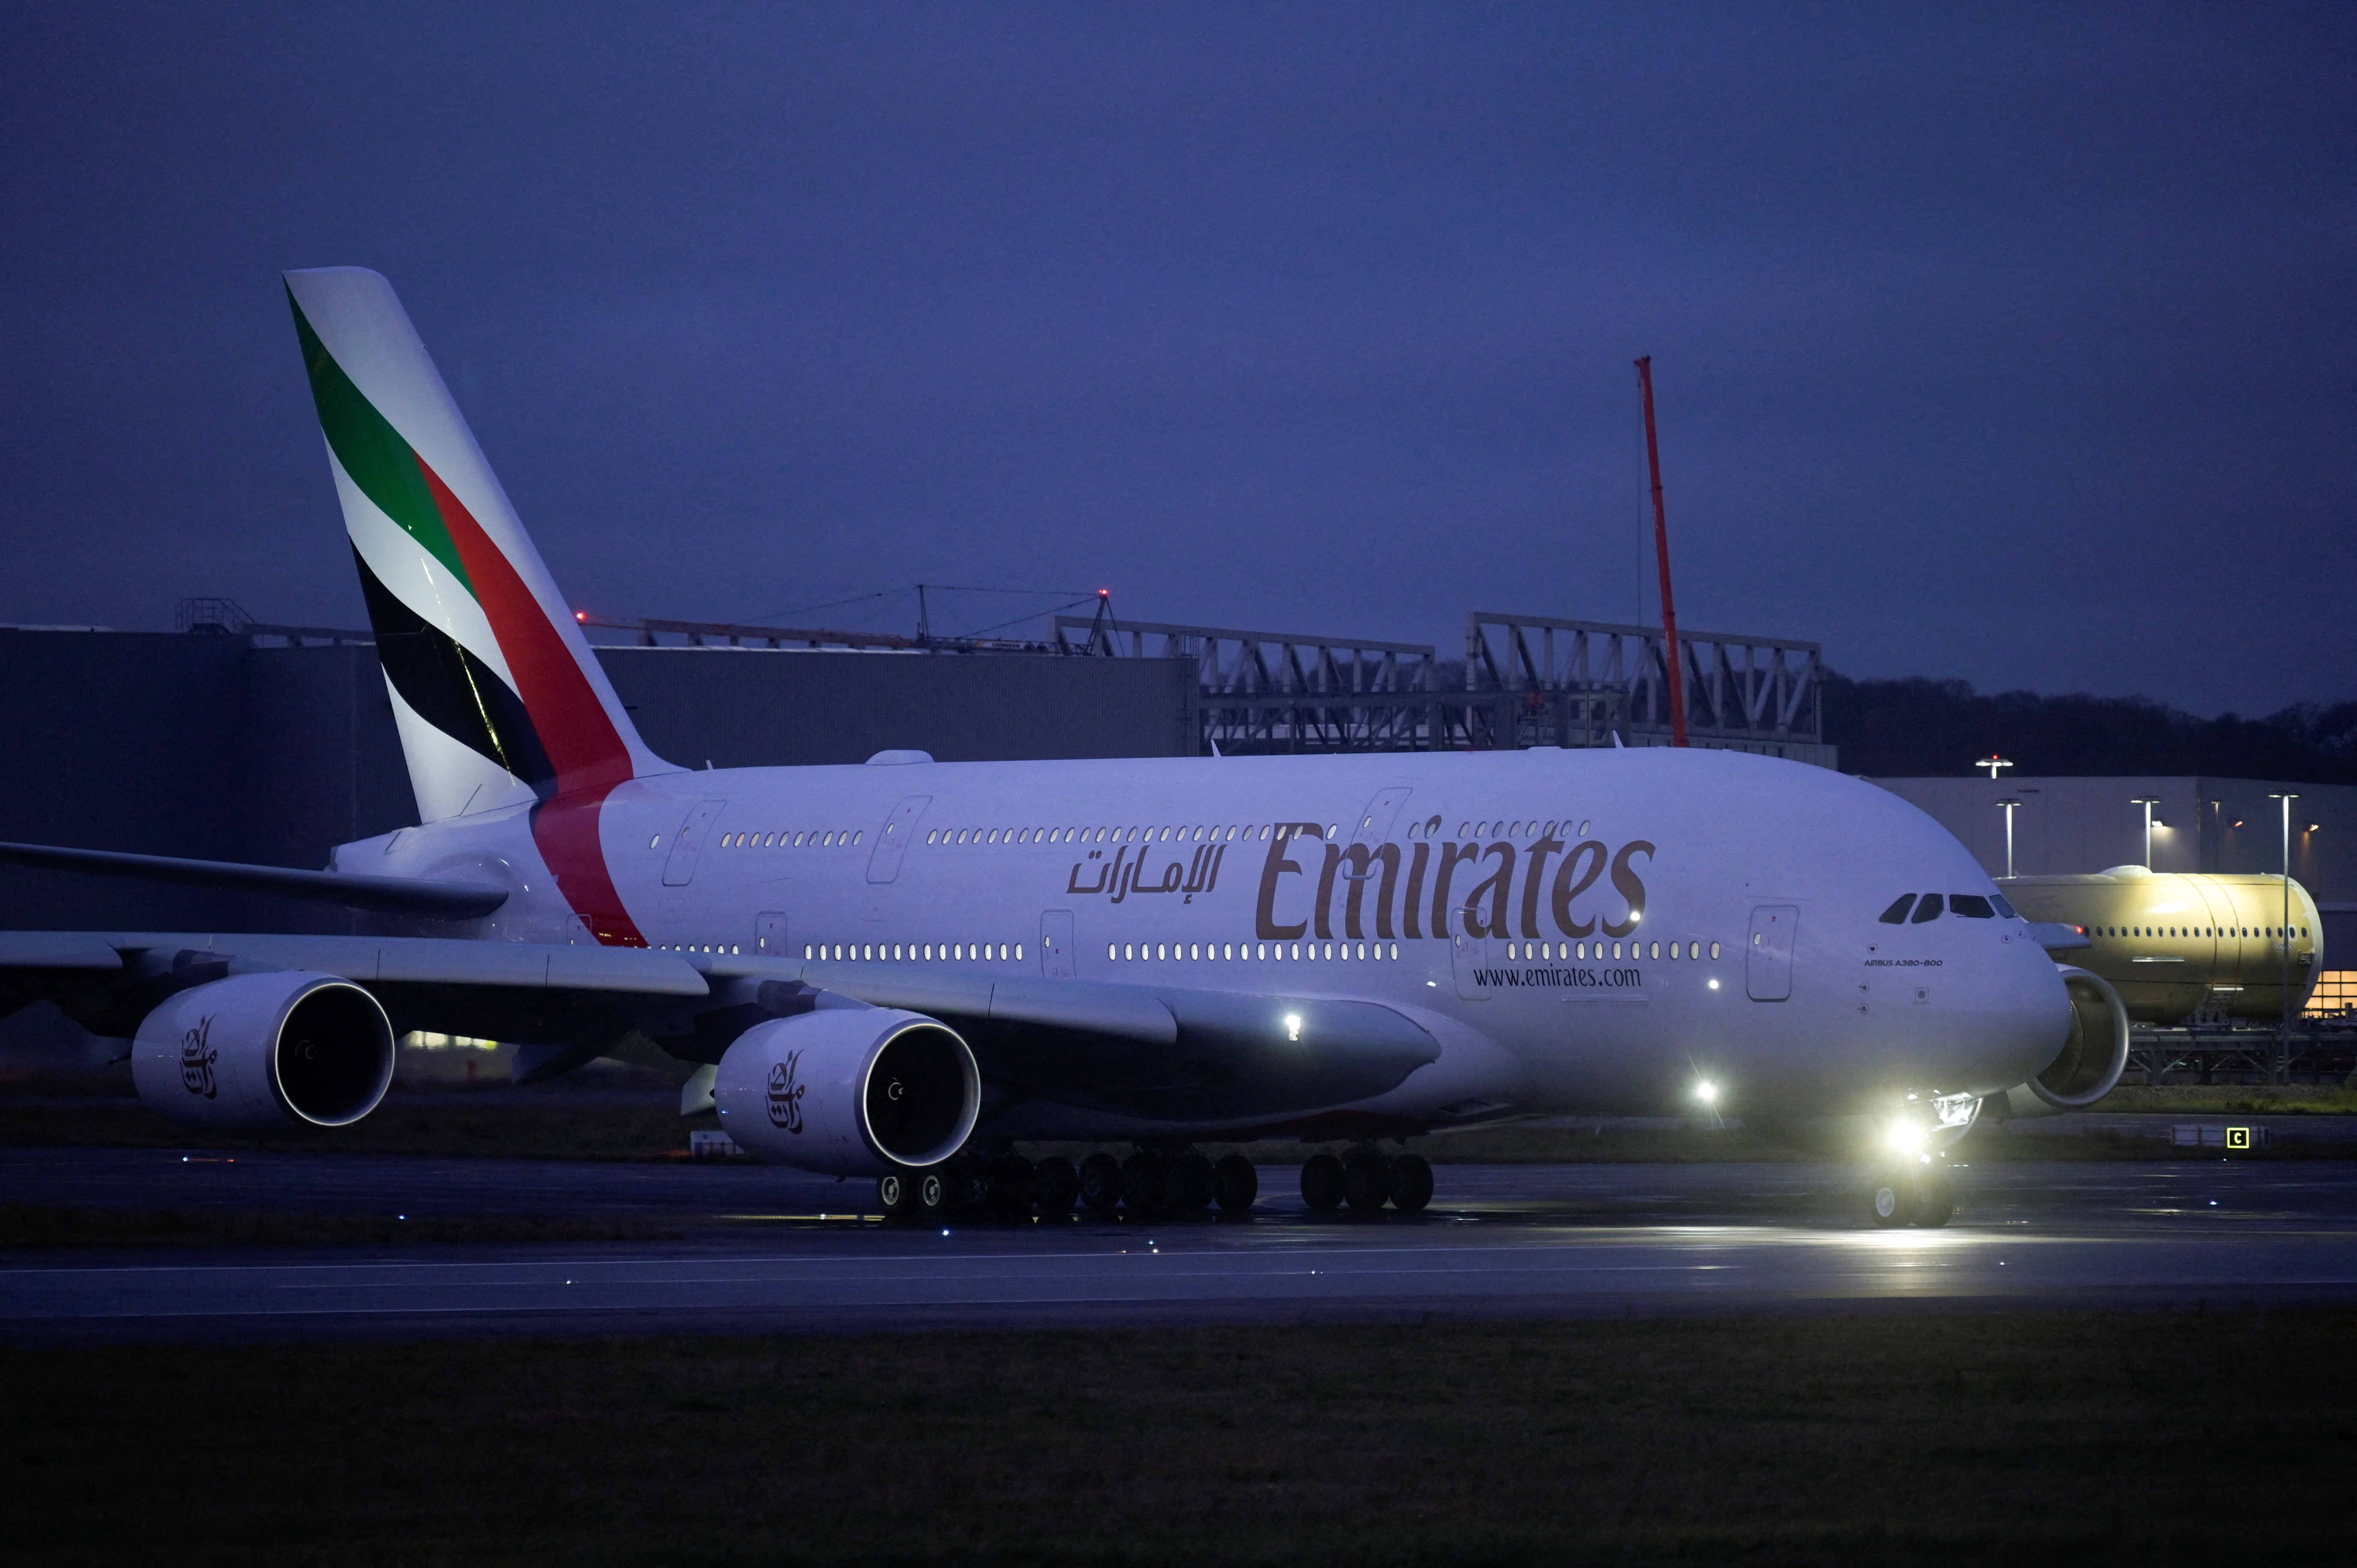 An Airbus A380 takes off after Airbus makes its last ever delivery of an A380 to Emirates in Hamburg-Finkenwerder